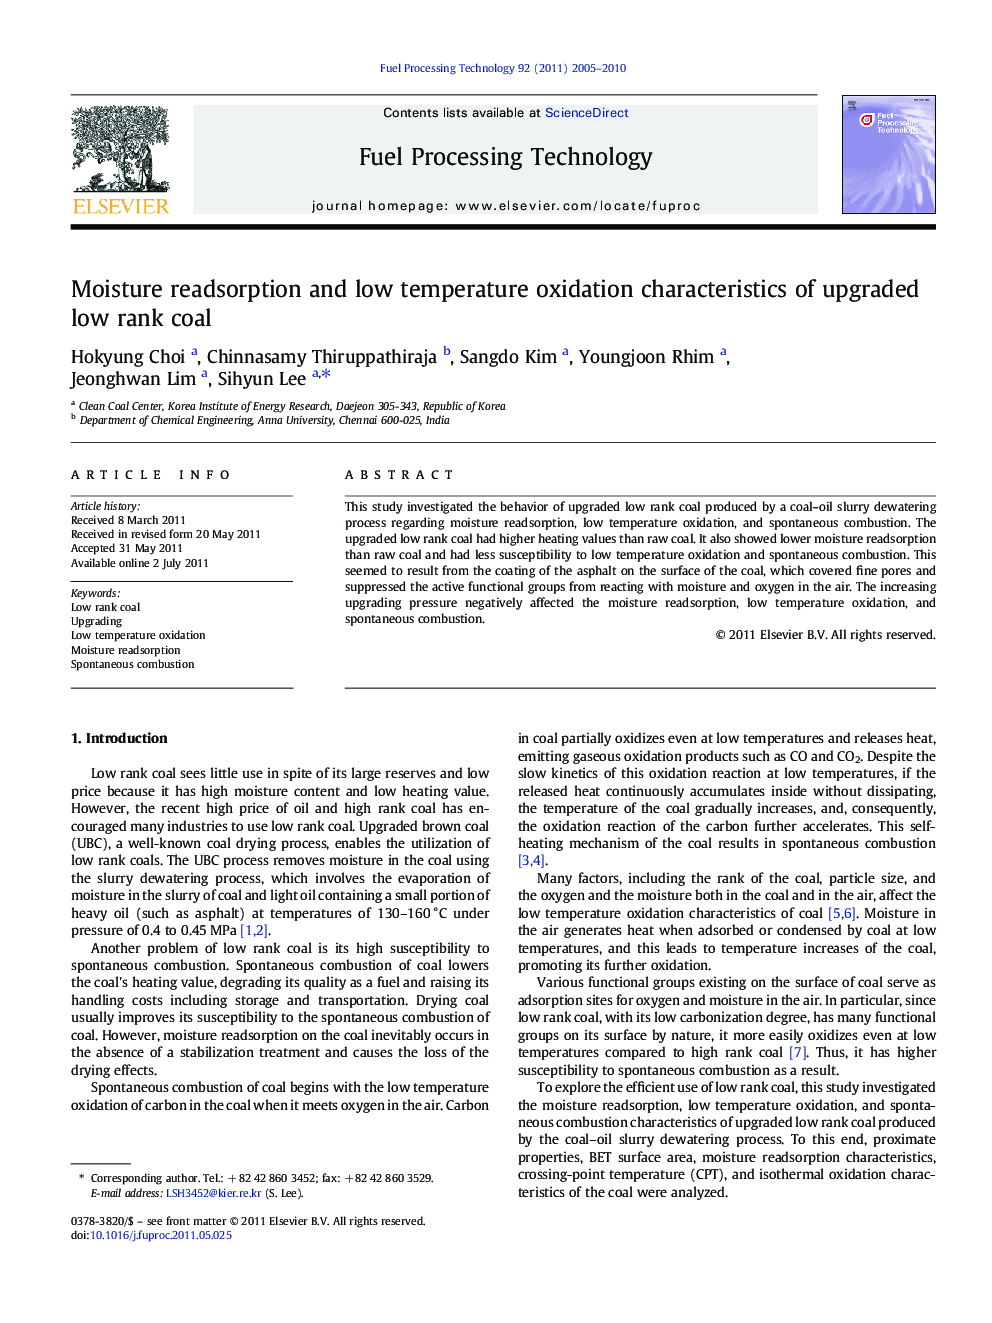 Moisture readsorption and low temperature oxidation characteristics of upgraded low rank coal